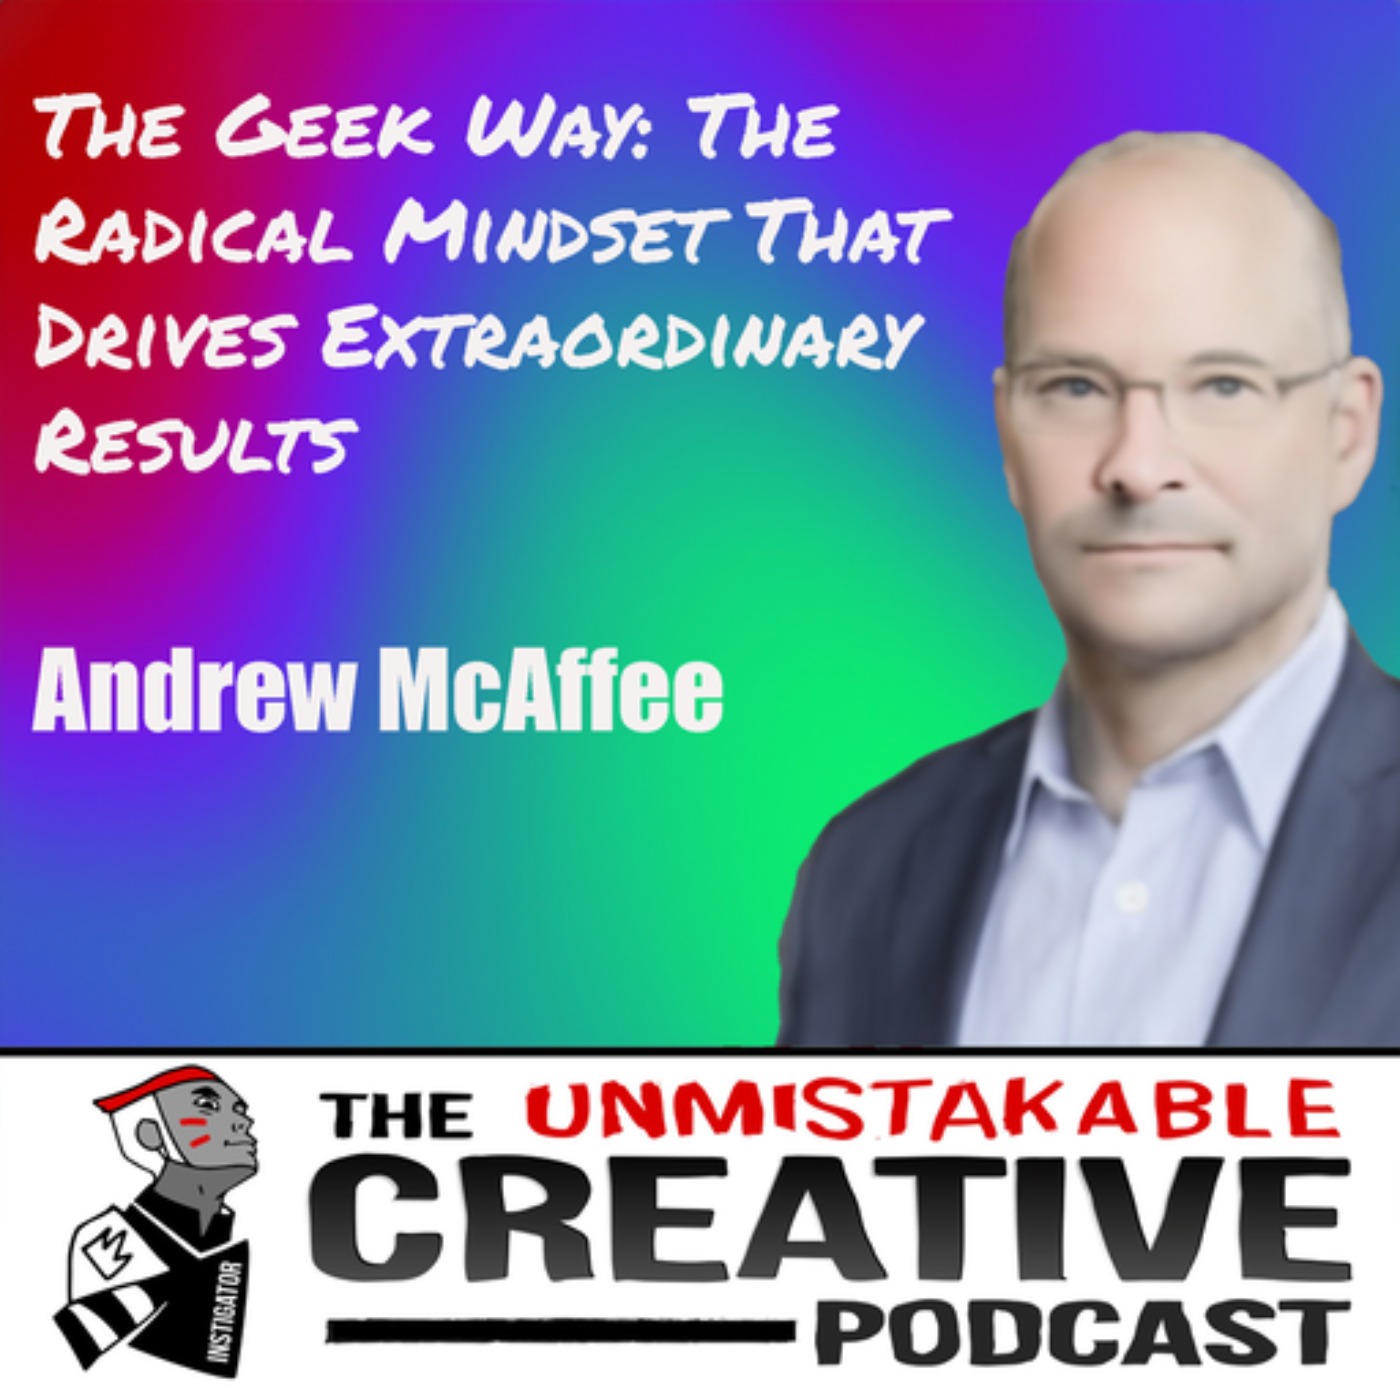 Andrew McAfee | The Geek Way: The Radical Mindset That Drives Extraordinary Results